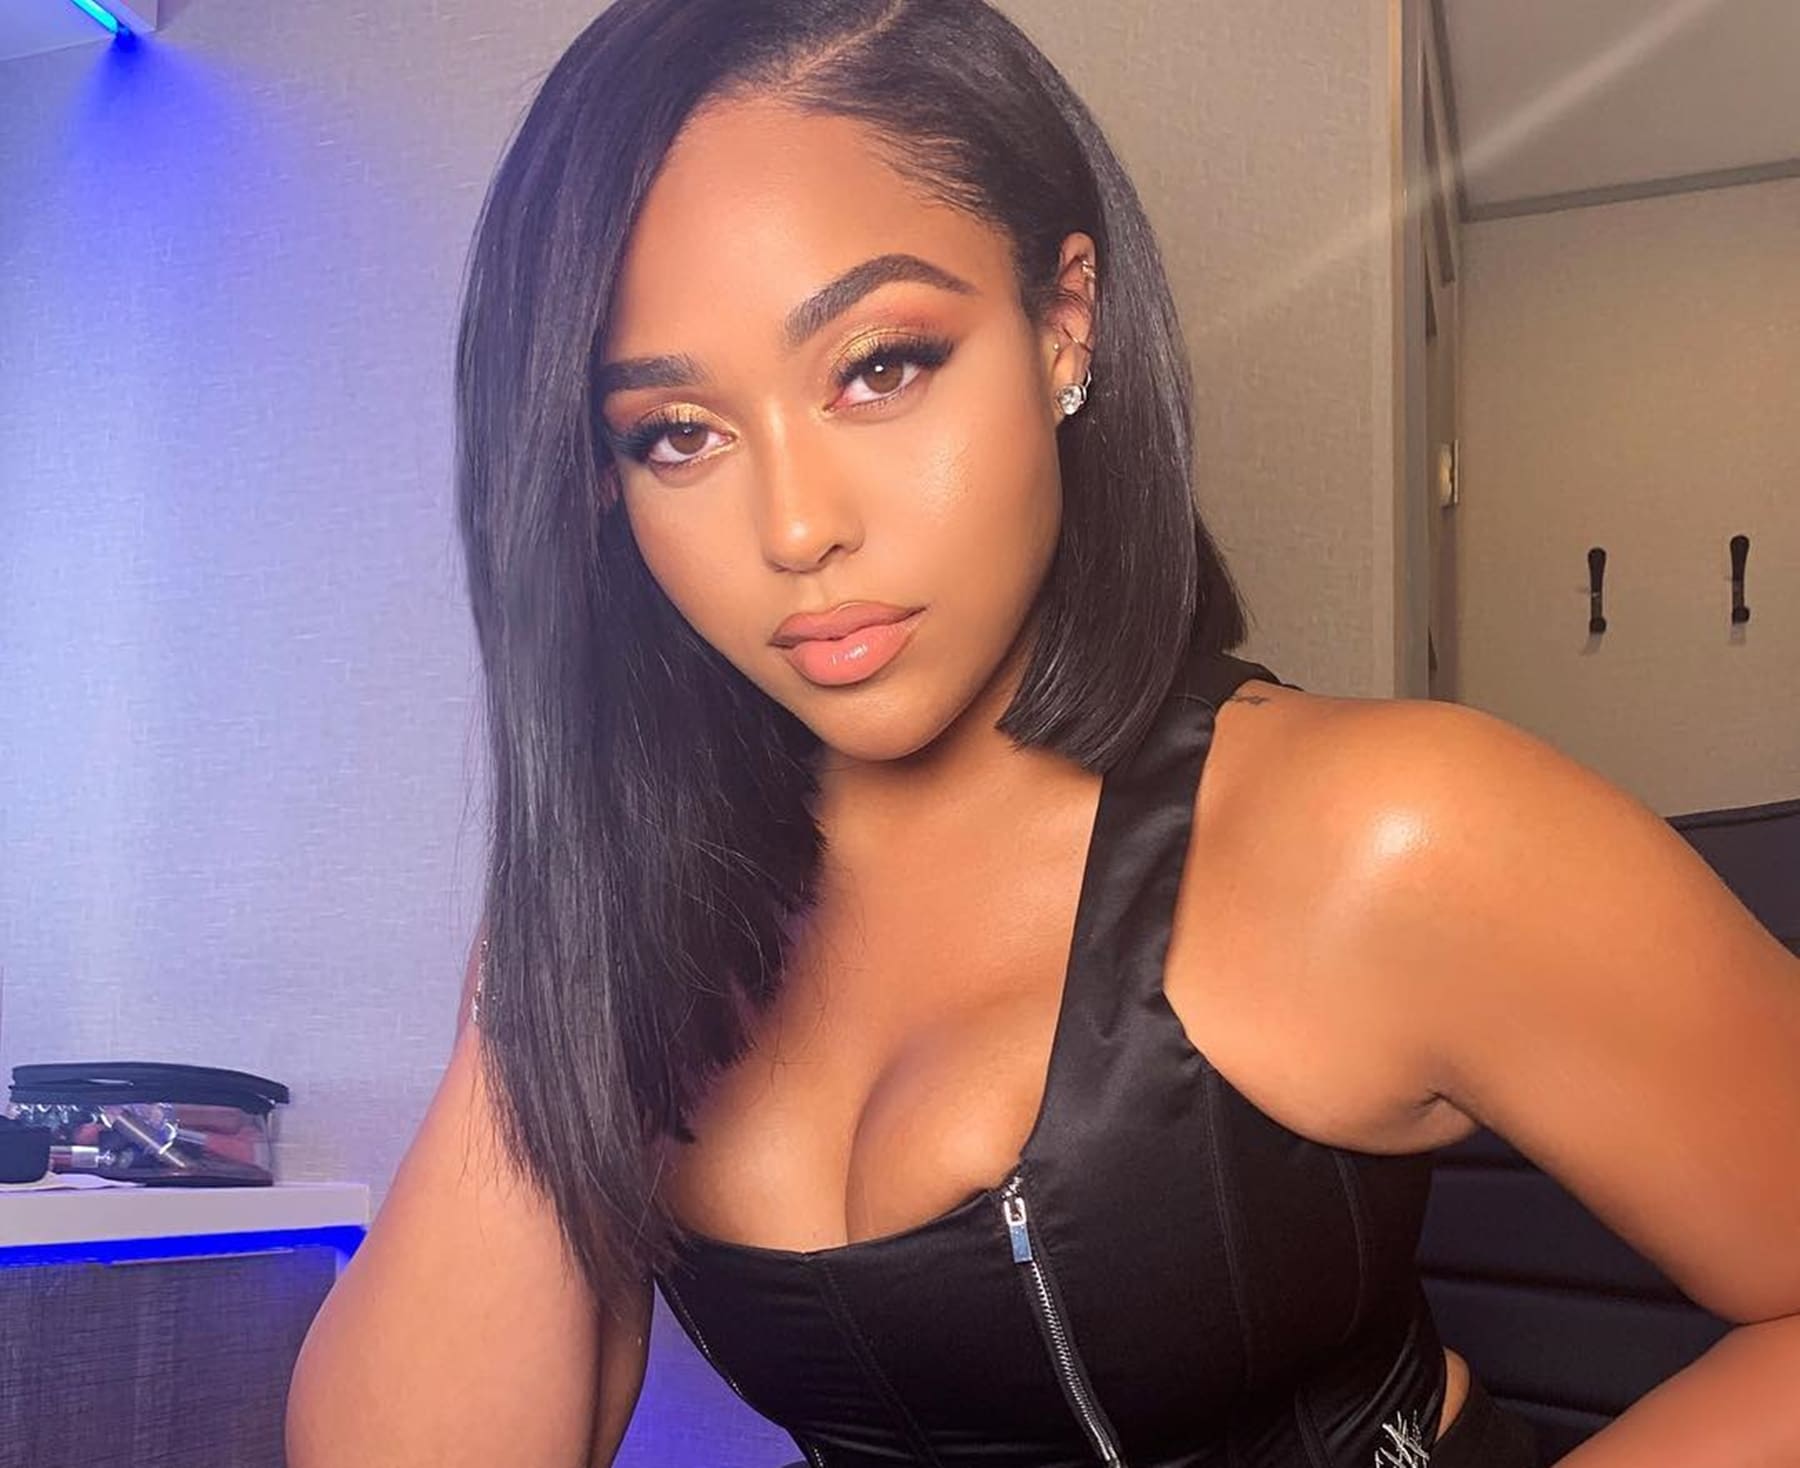 jordyn-woods-is-showing-fans-the-workout-routine-that-got-her-the-juicy-body-she-keeps-flaunting